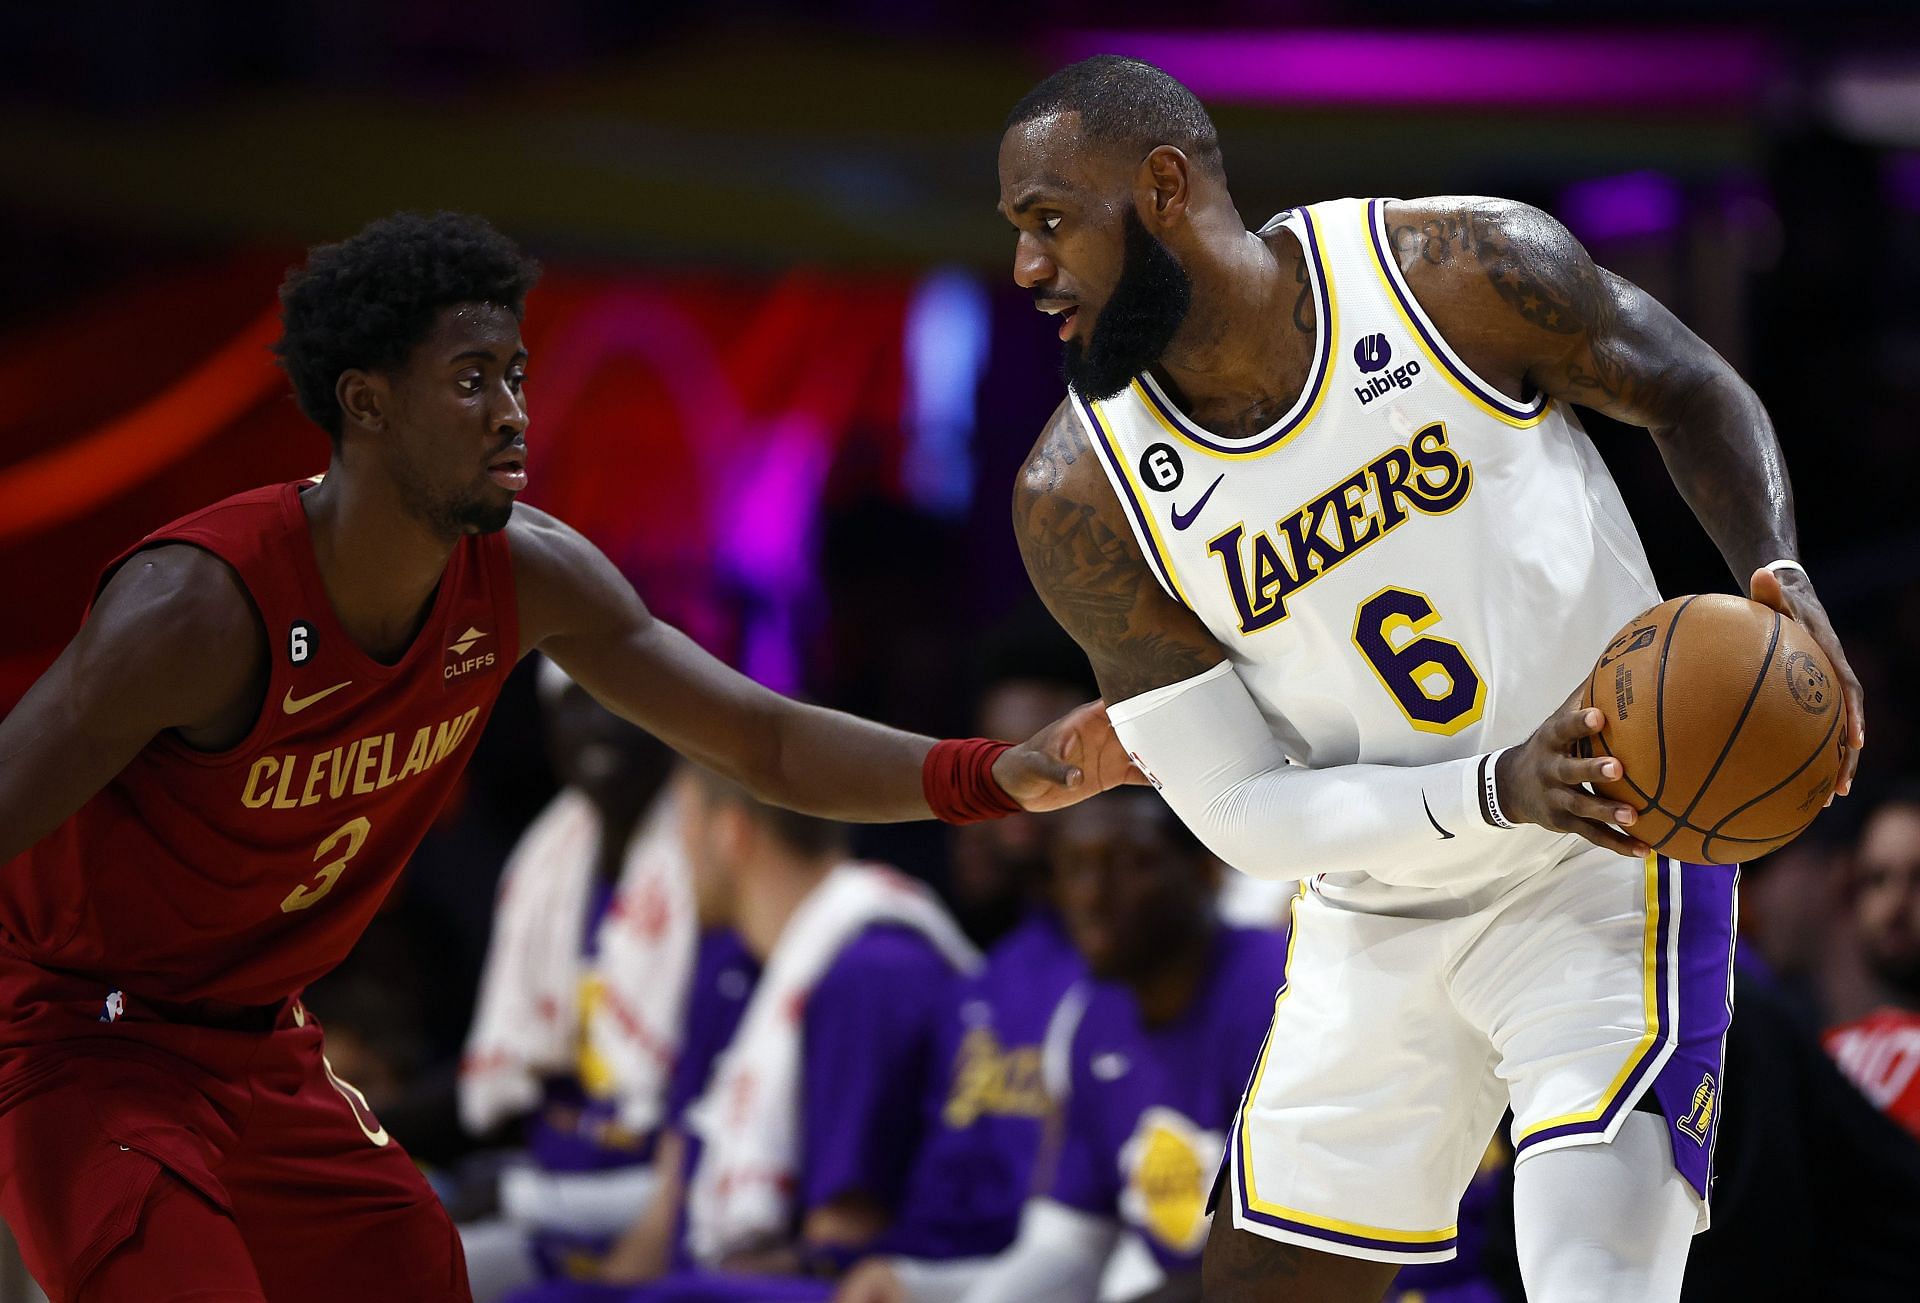 Cleveland Cavaliers vs. Los Angeles Lakers